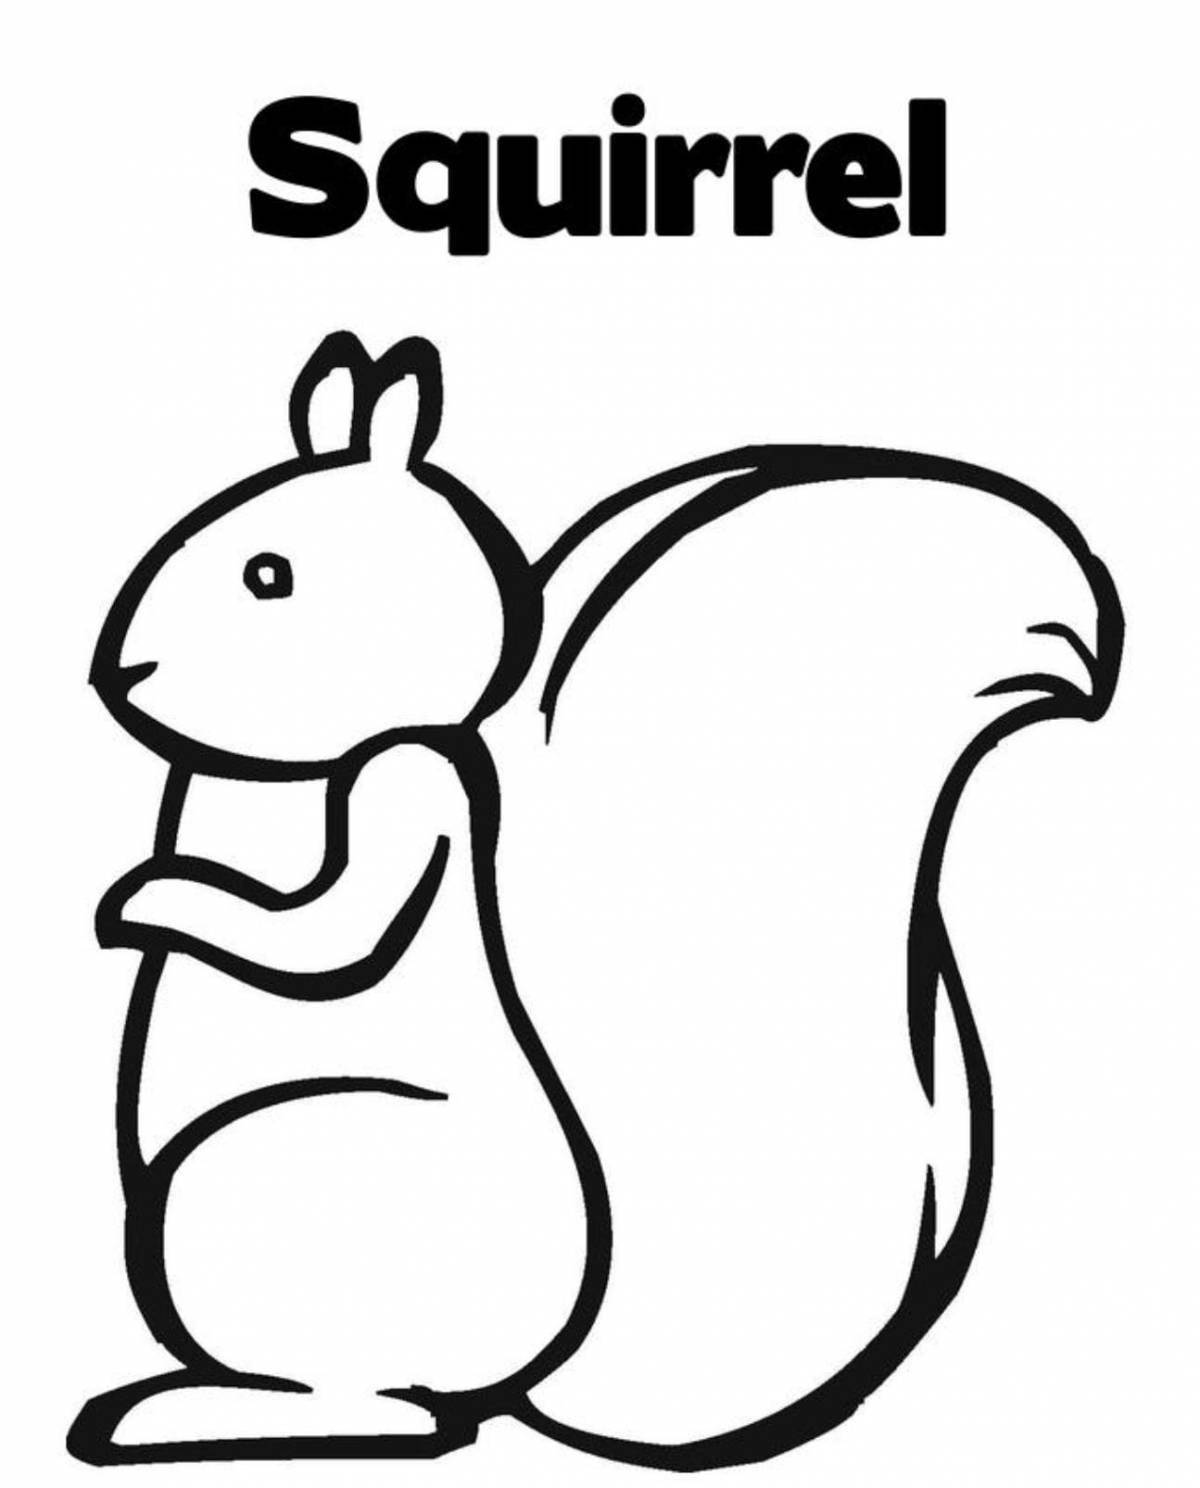 Bright squirrel coloring book for children 2-3 years old